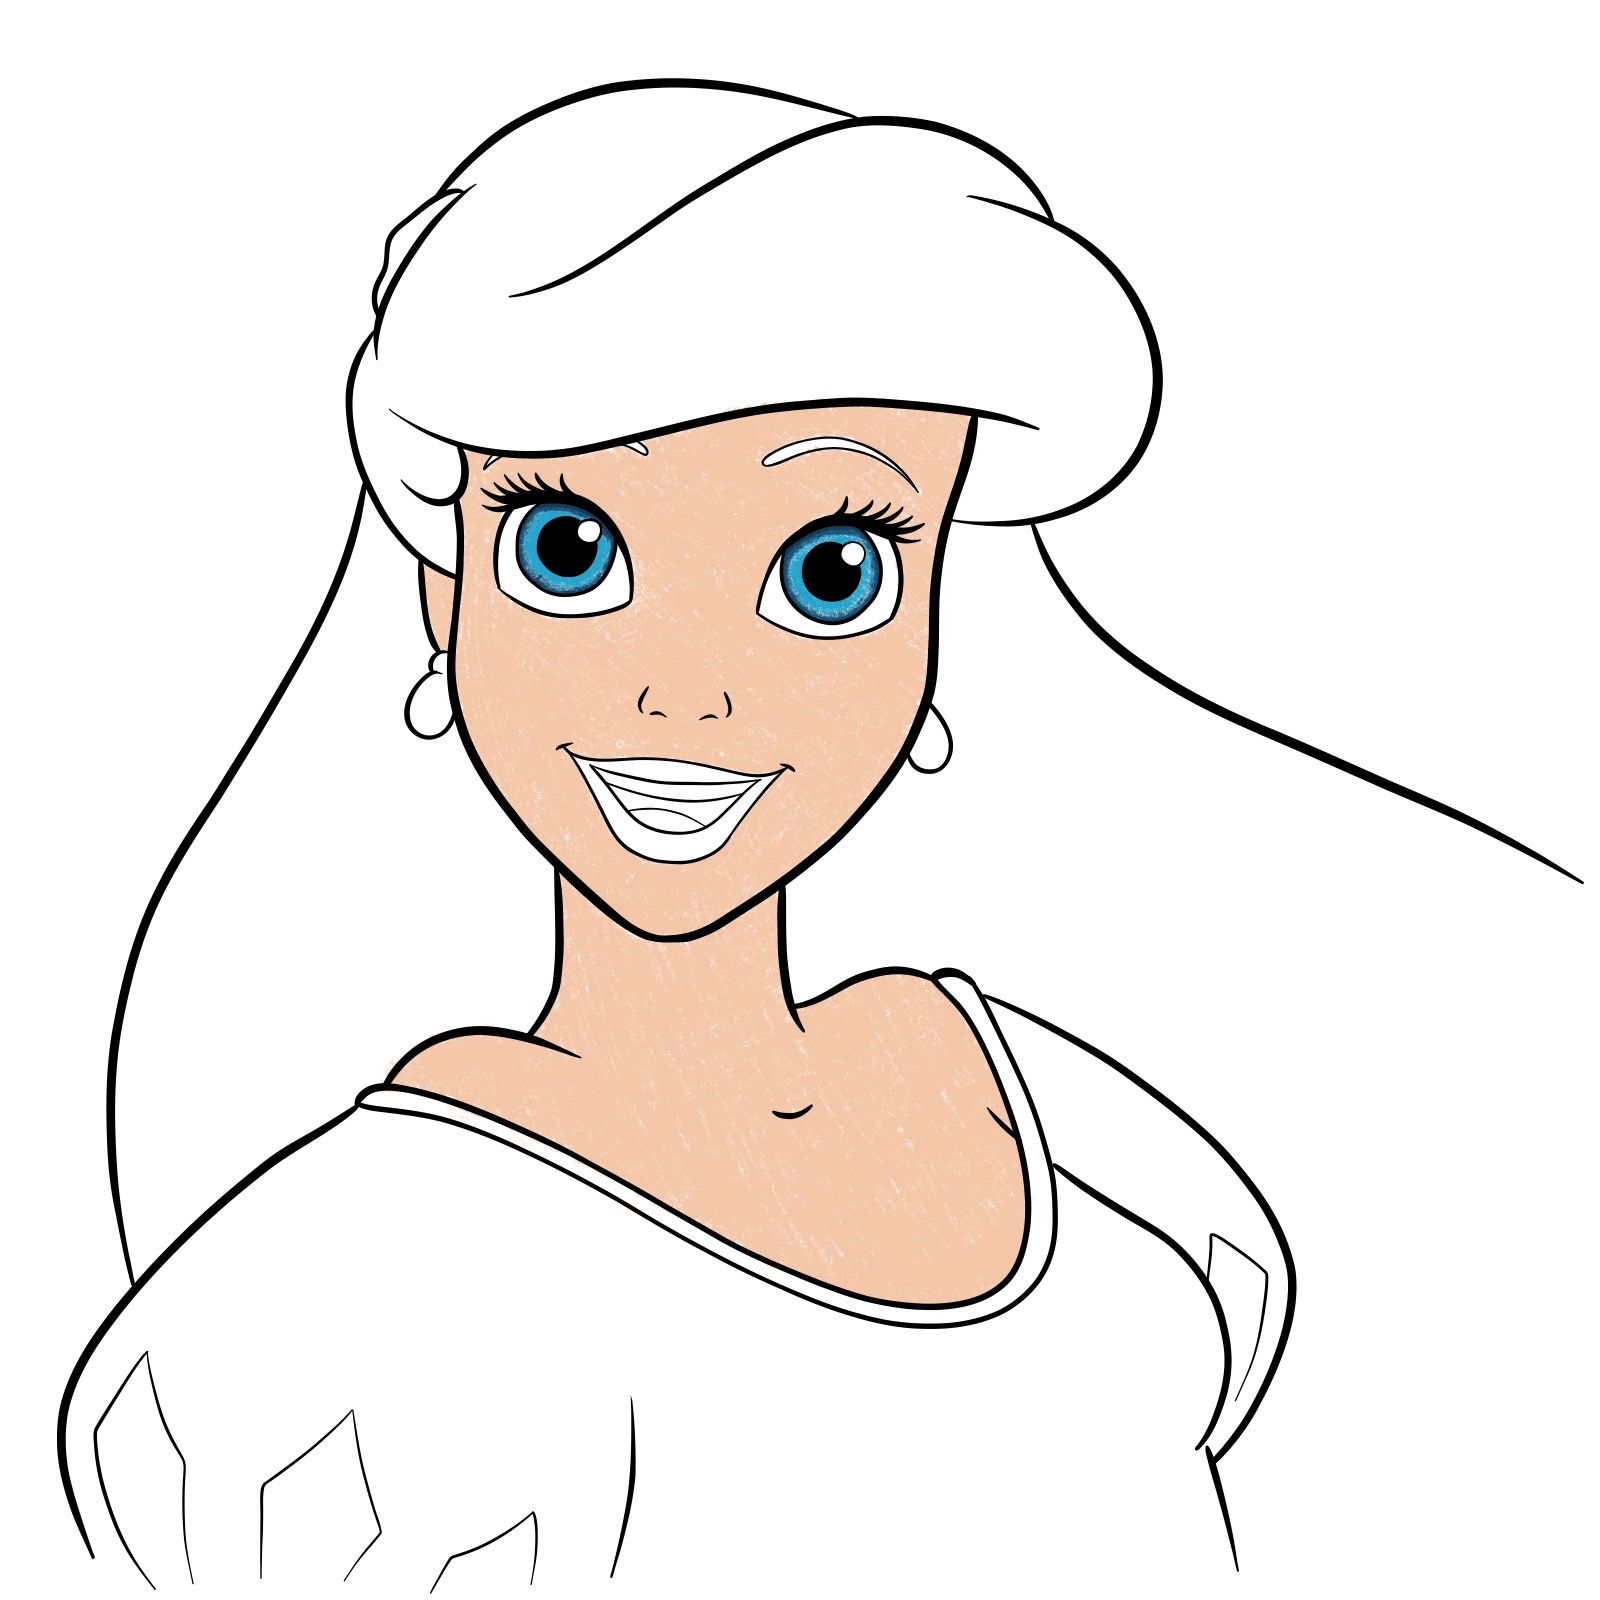 How to draw Ariel's face - The Little Mermaid - step 31